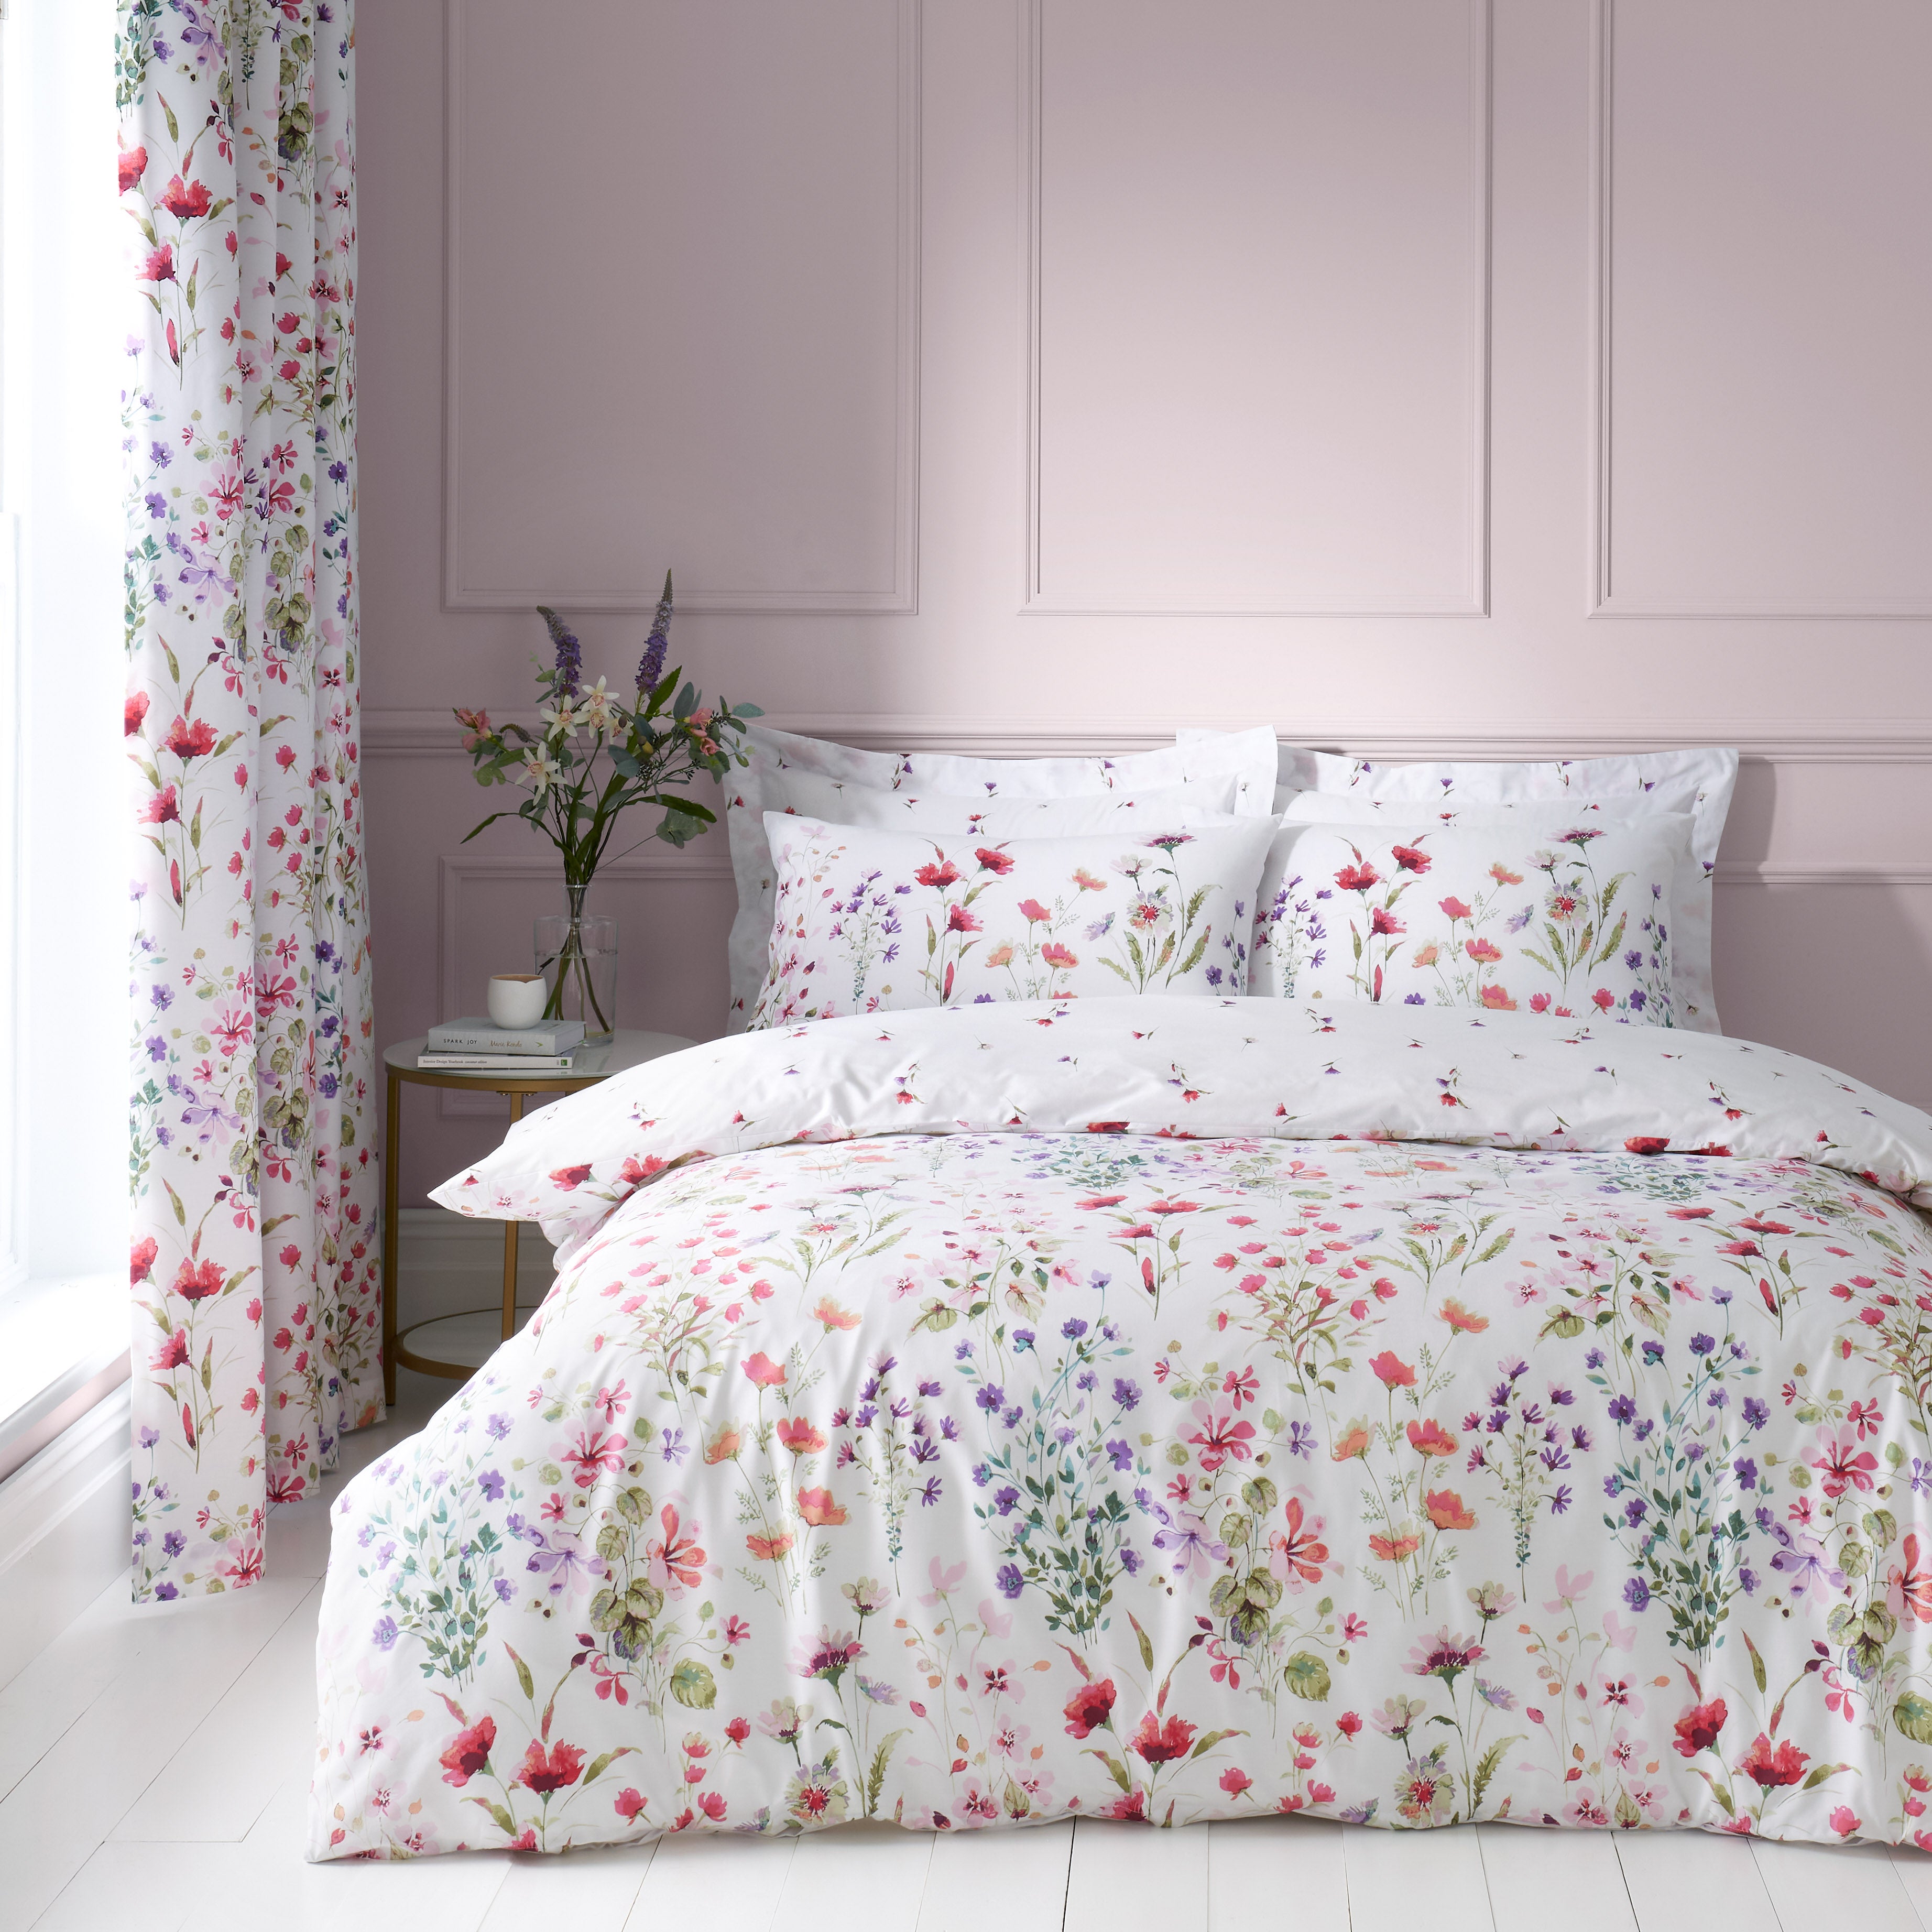 Watercoloured Floral Pink Duvet Cover And Pillowcase Set Pinkwhite